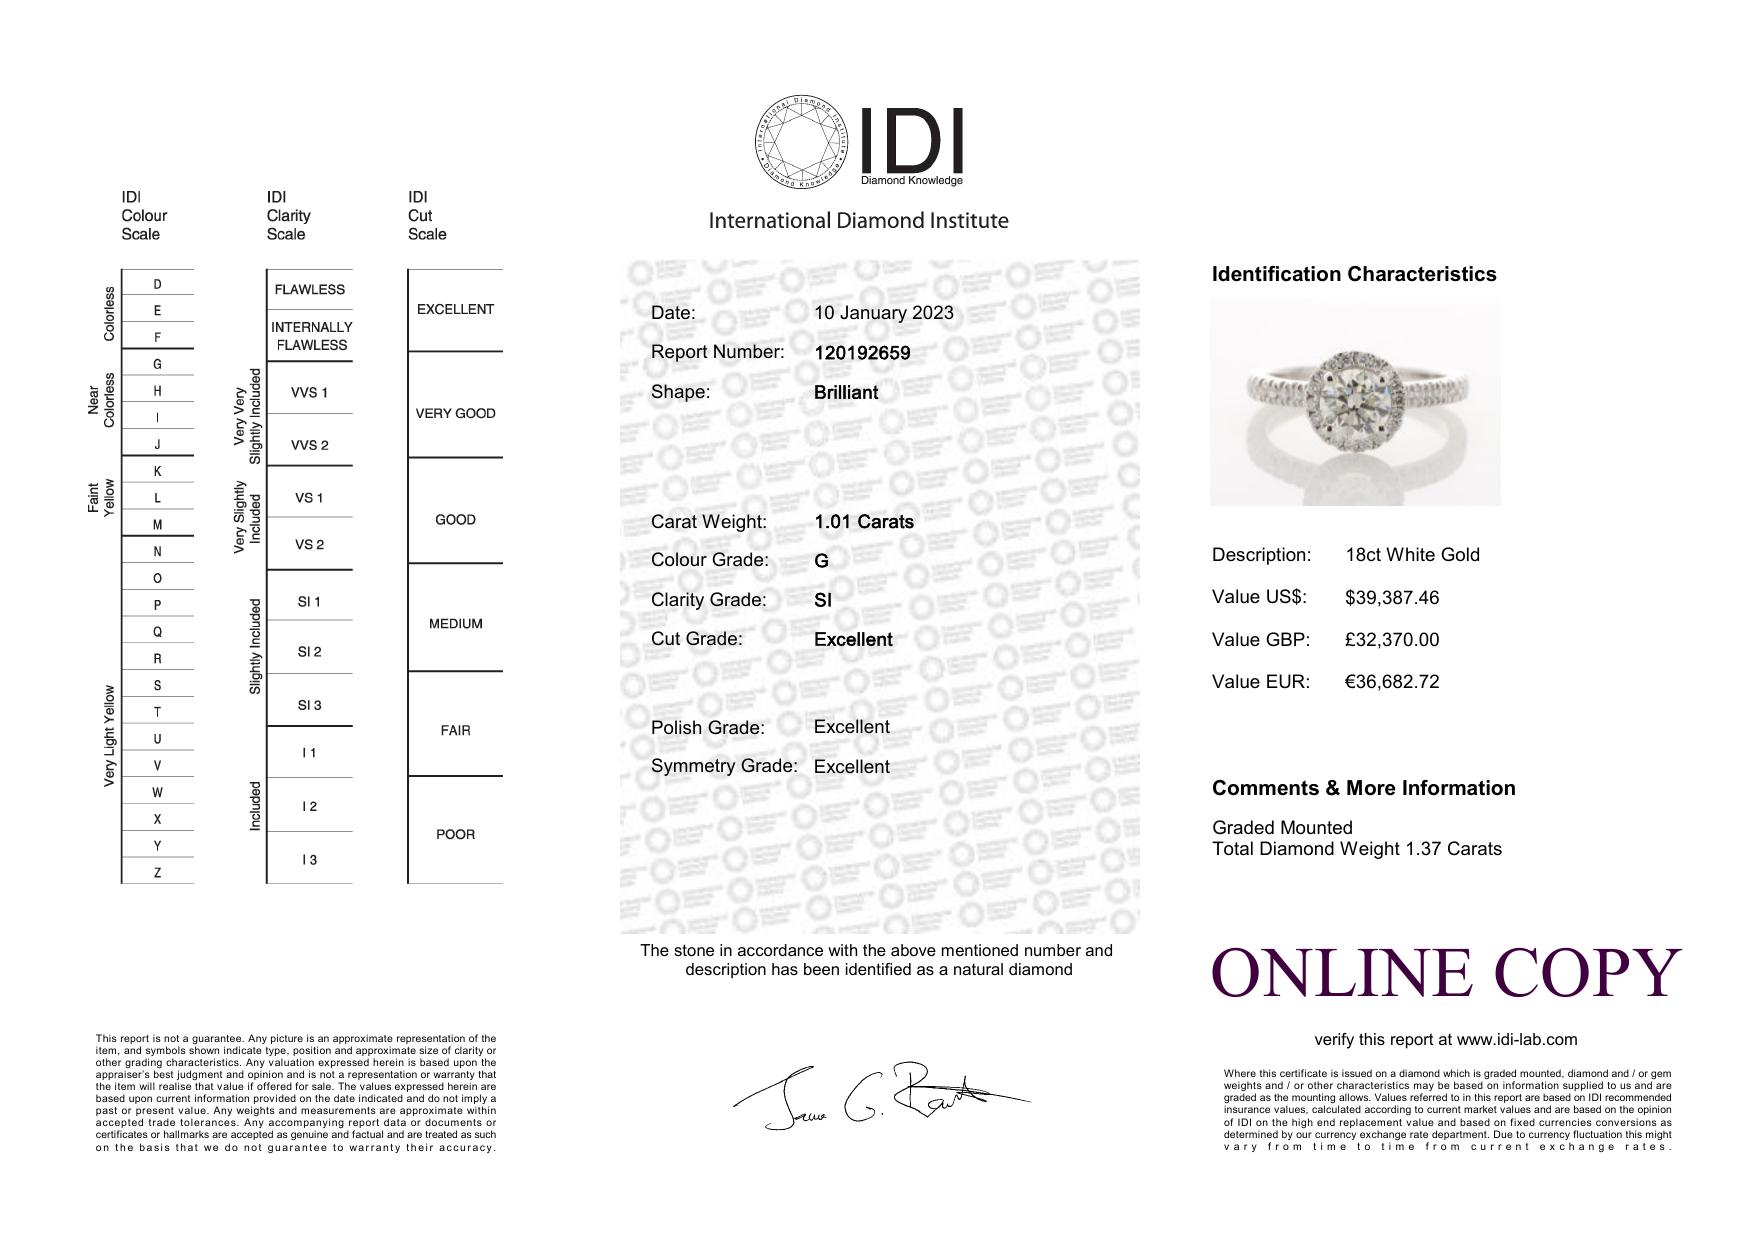 18ct White Gold Single Stone With Halo Setting Ring (1.01) 1.37 Carats - Valued By IDI £32,370. - Image 5 of 5